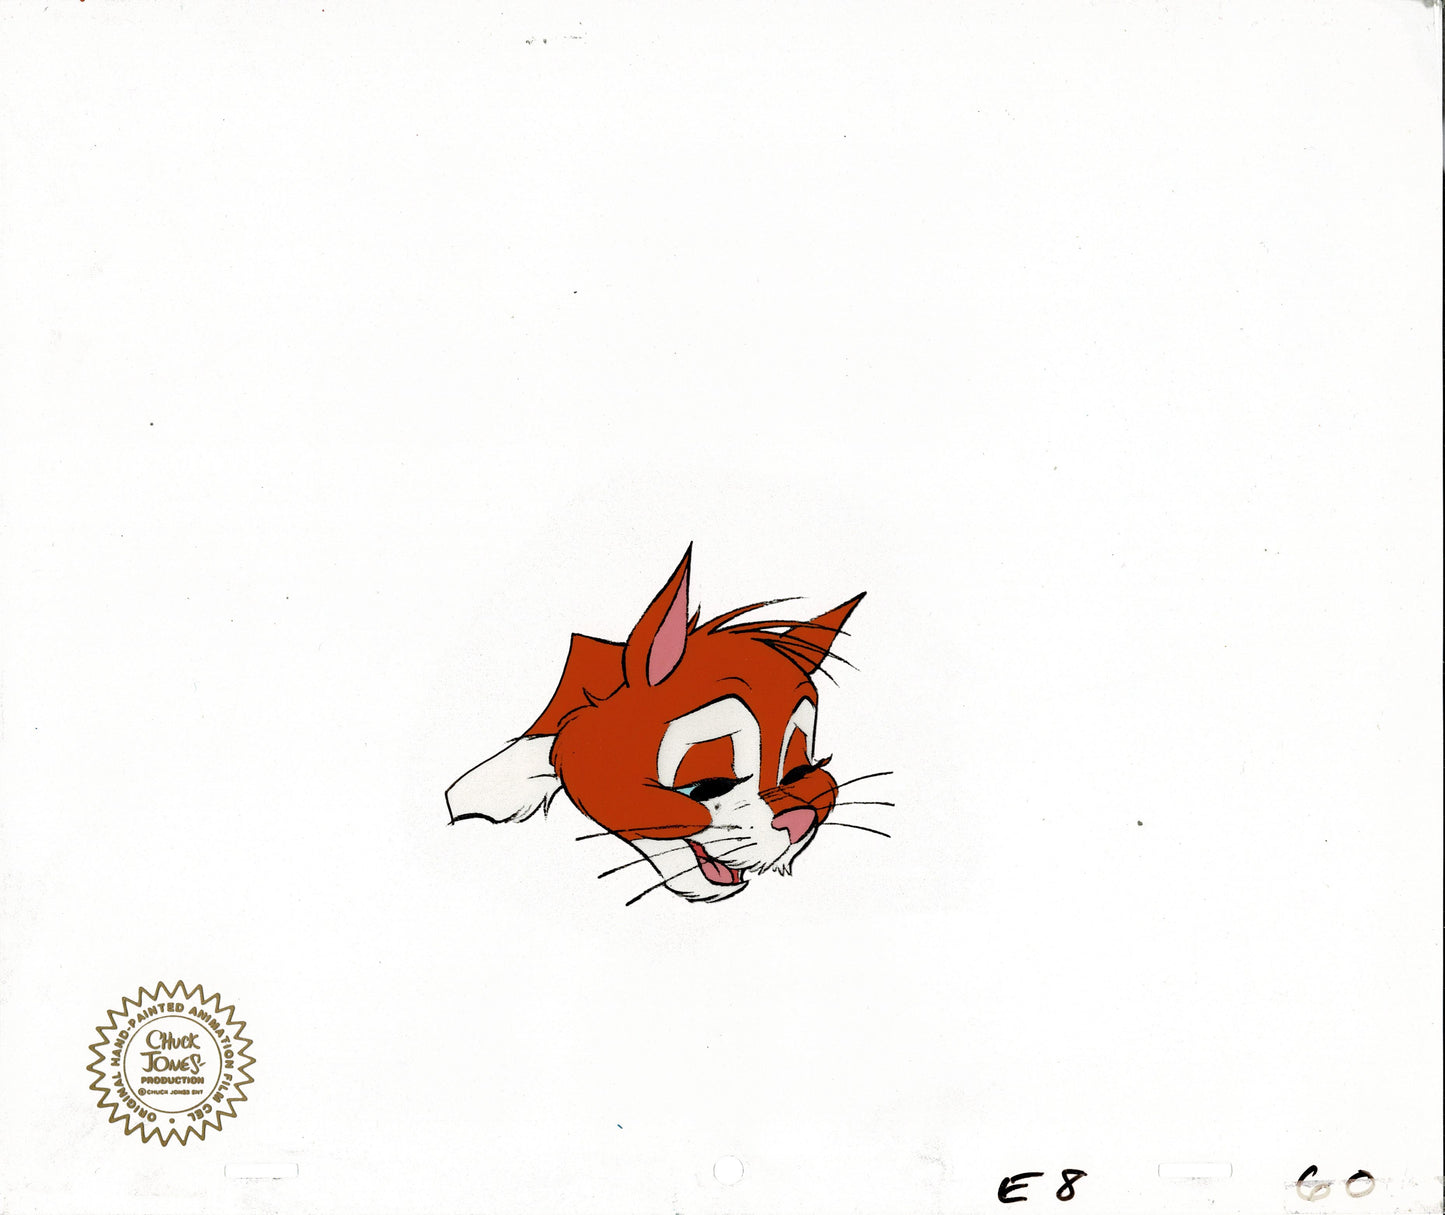 Yankee Doodle Cricket Harry the Cat by Chuck Jones 1975 Original Production Animation Cel With Studio Seal 60